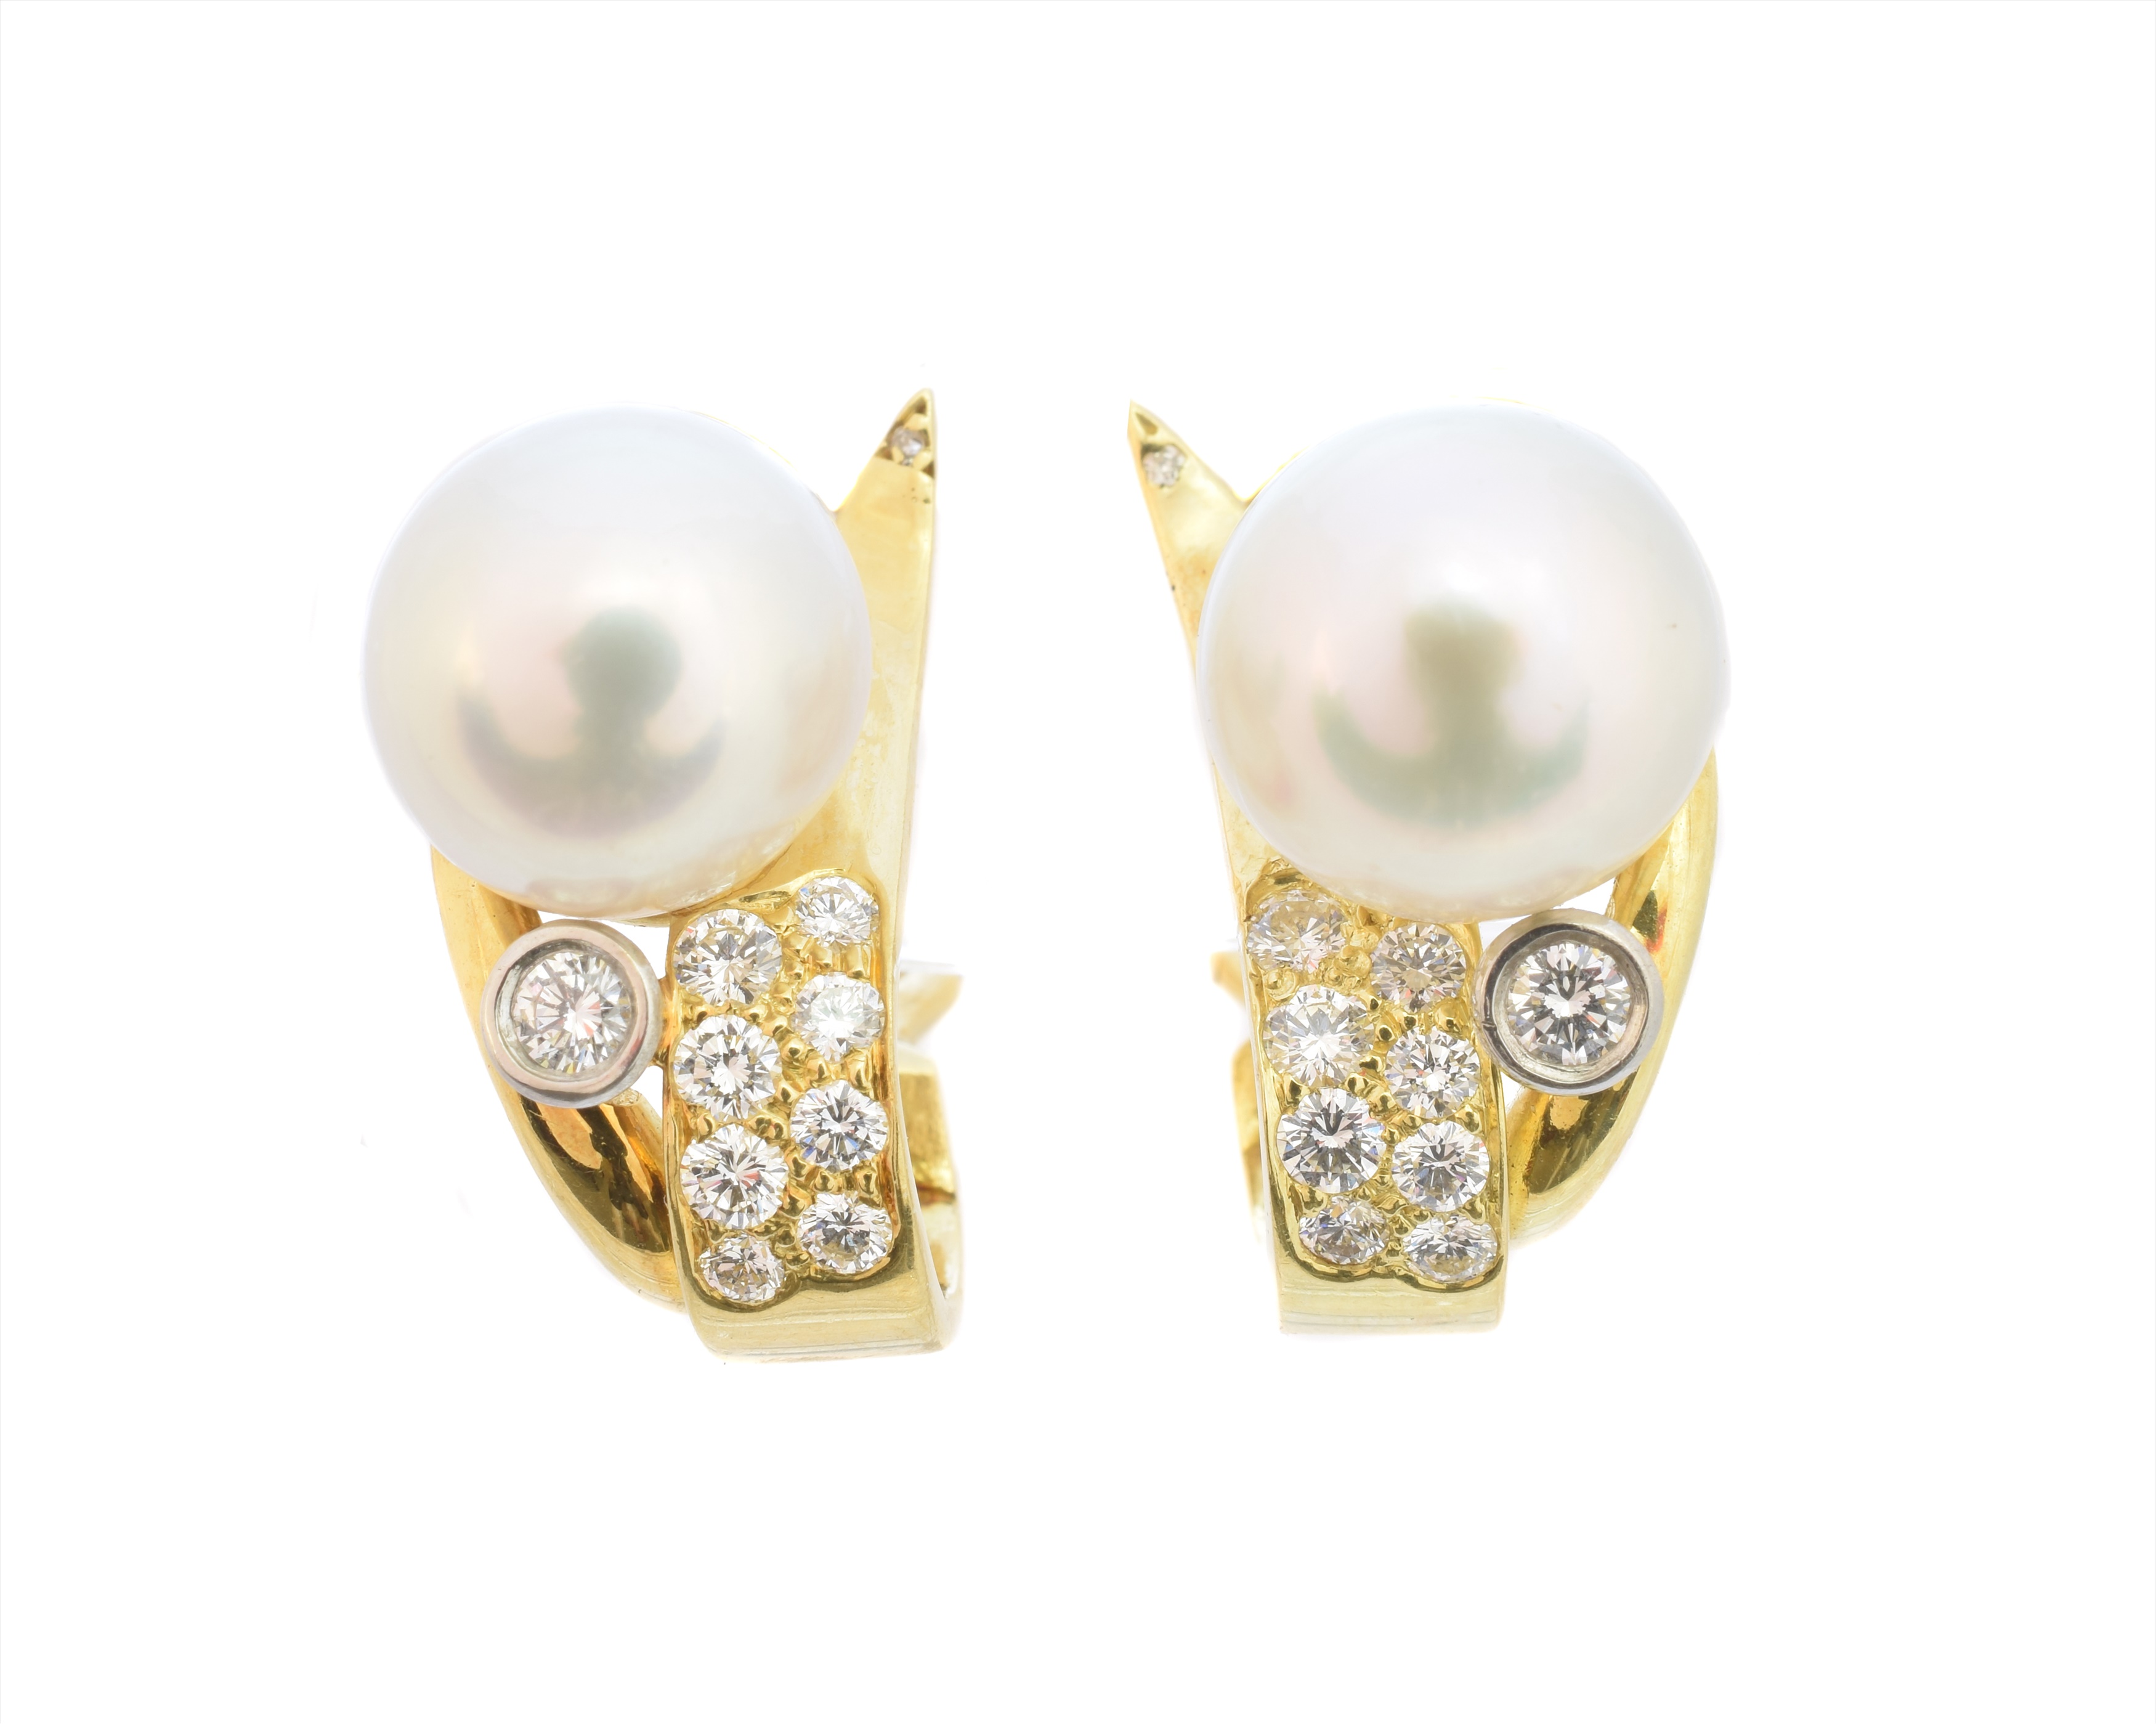 A pair of 18ct gold cultured pearl and diamond earrings by Boodles